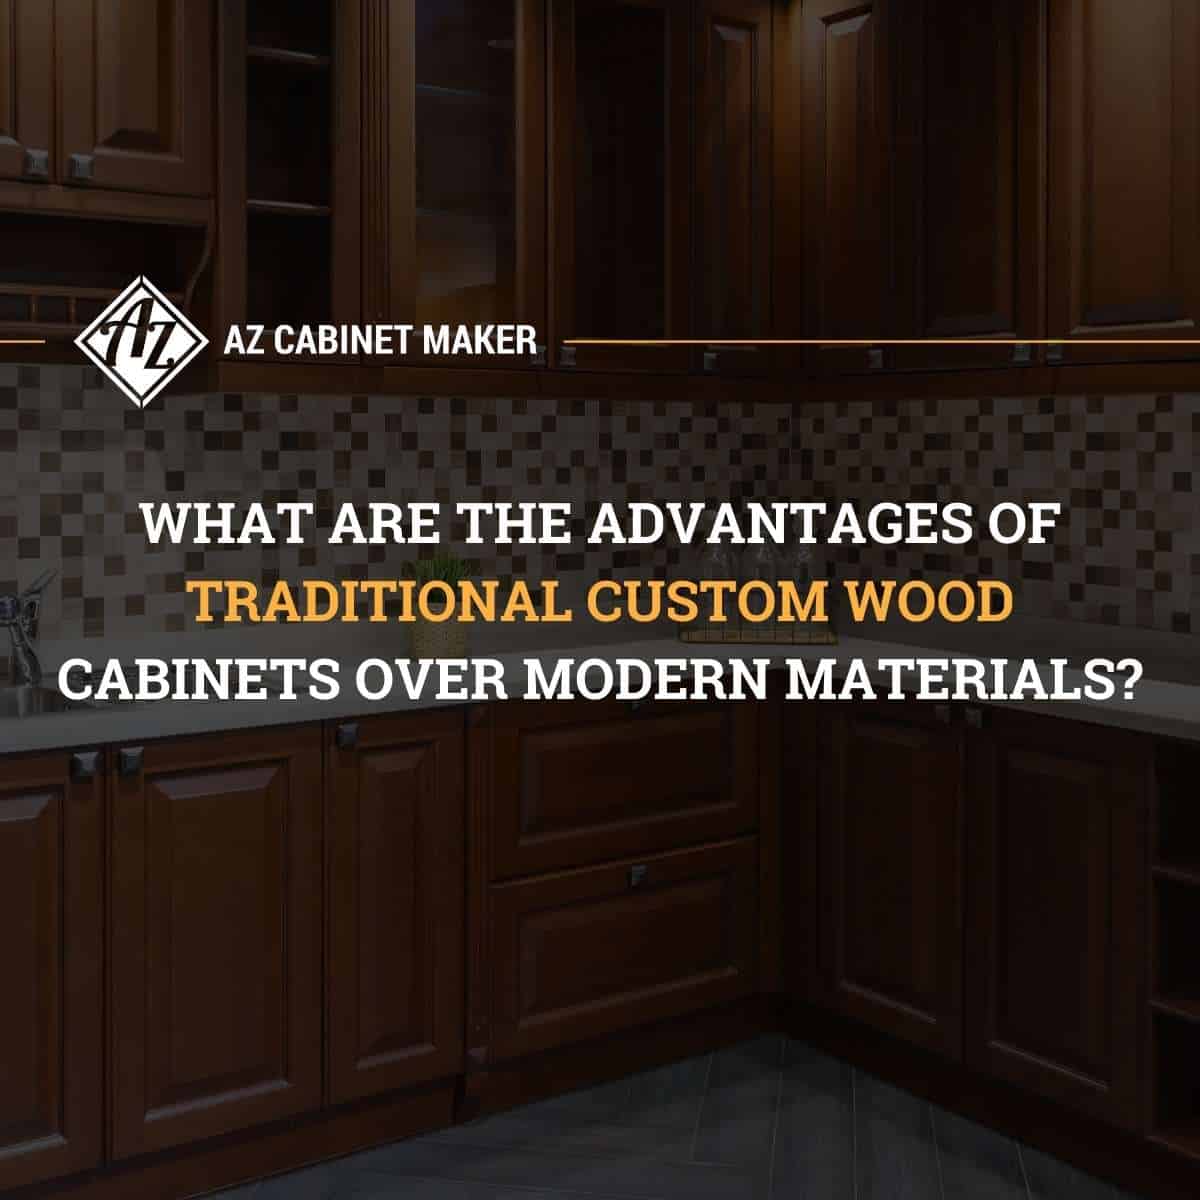 What Are The Advantages Of Traditional Custom Wood Cabinets Over Modern Materials